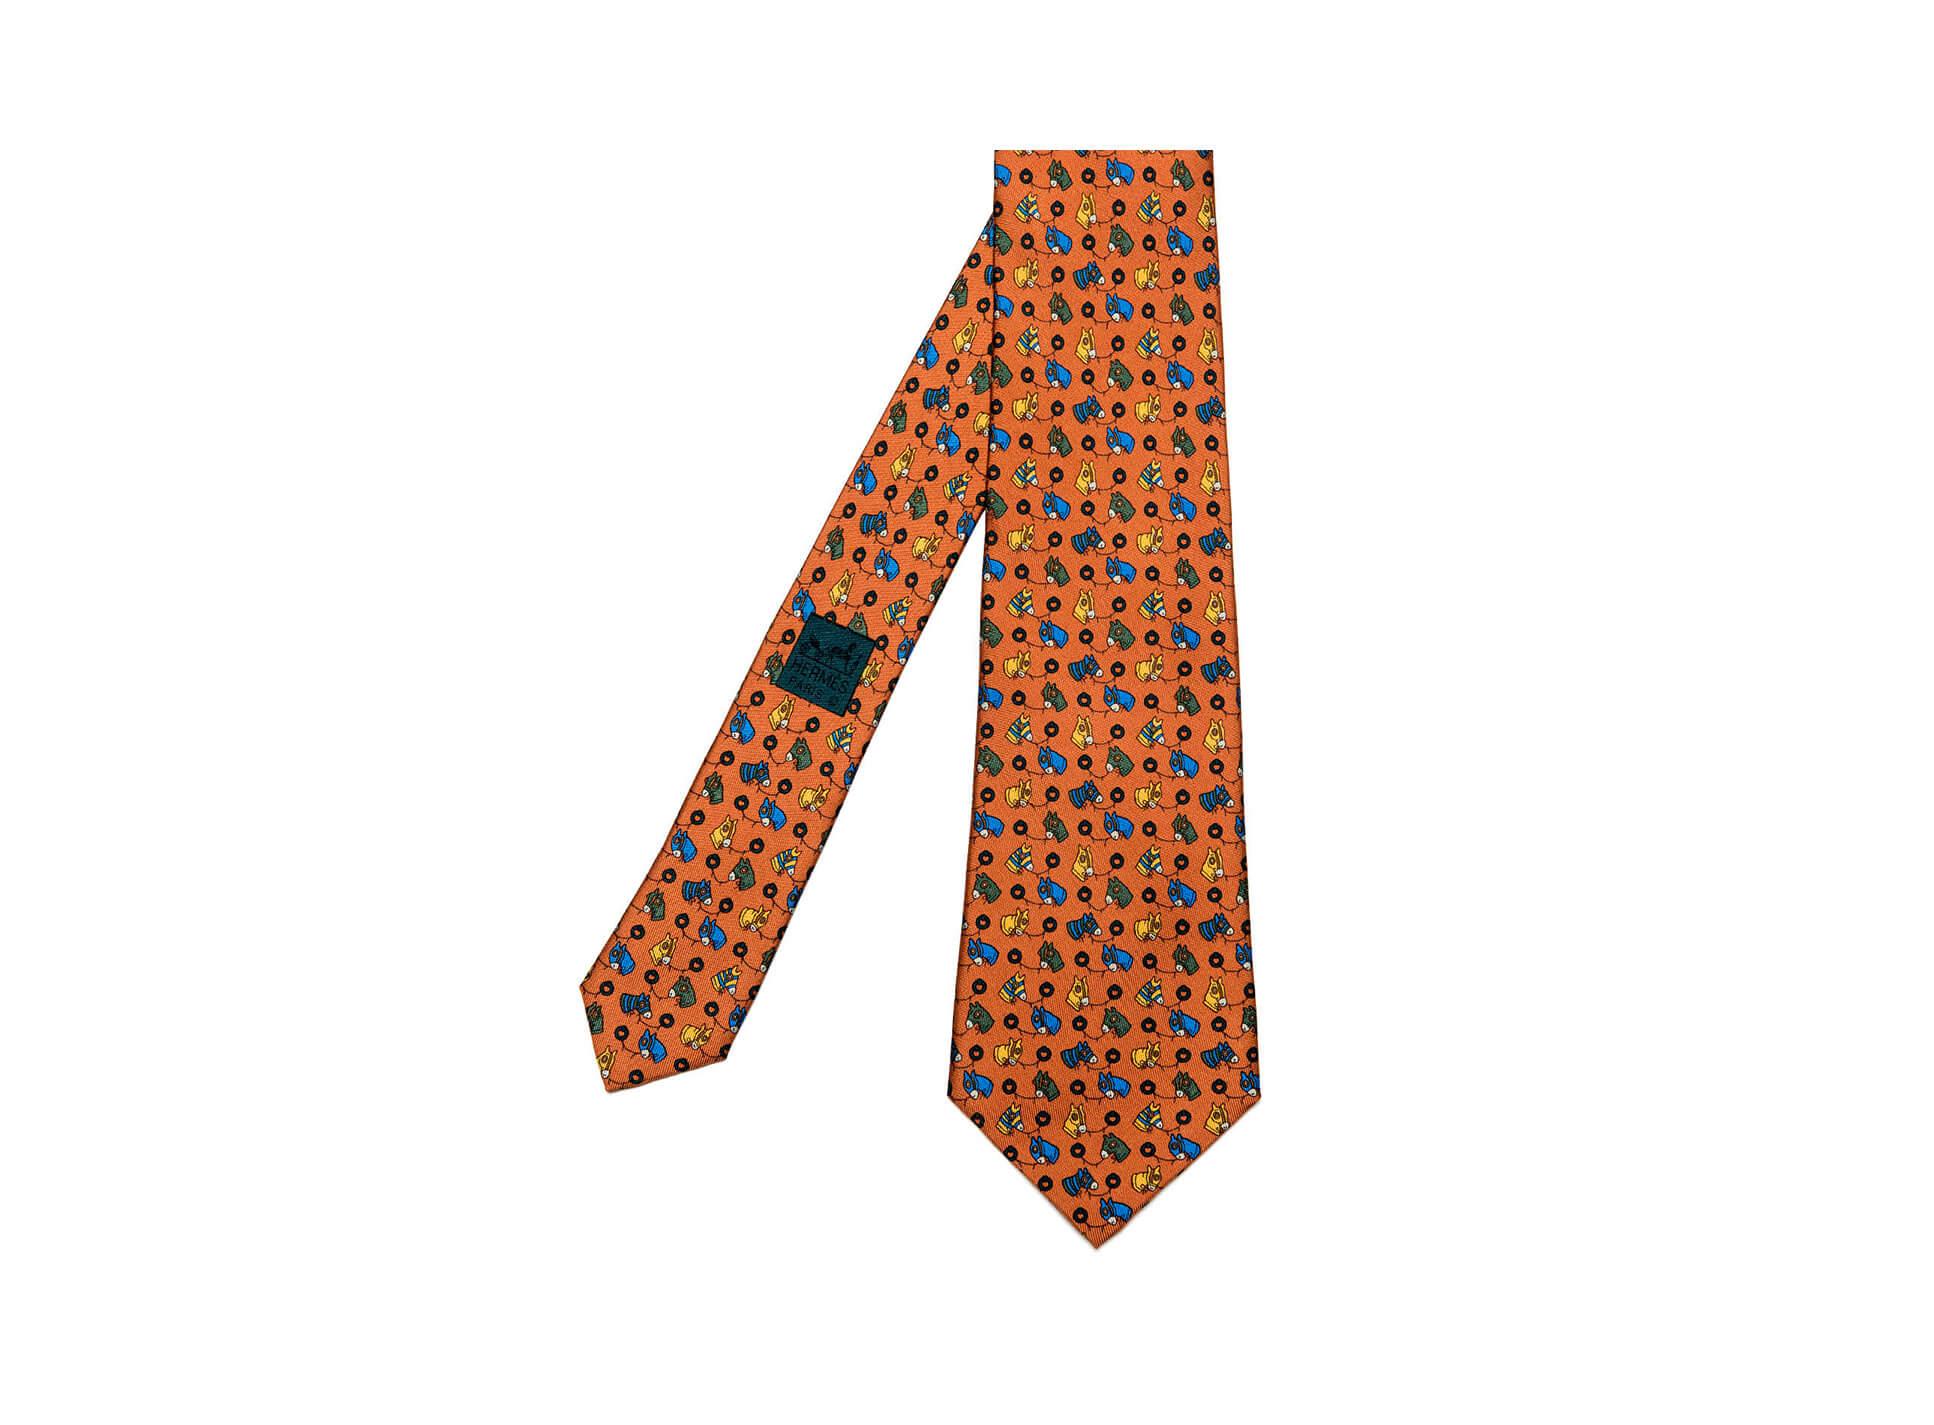 This vibrant coloured Hermes Vintage Tie, is decorated with hooded Race-horses, a classic Hermes equine related design. Made from 100% Silk, the tie is in pristine, 'store-fresh' condition.